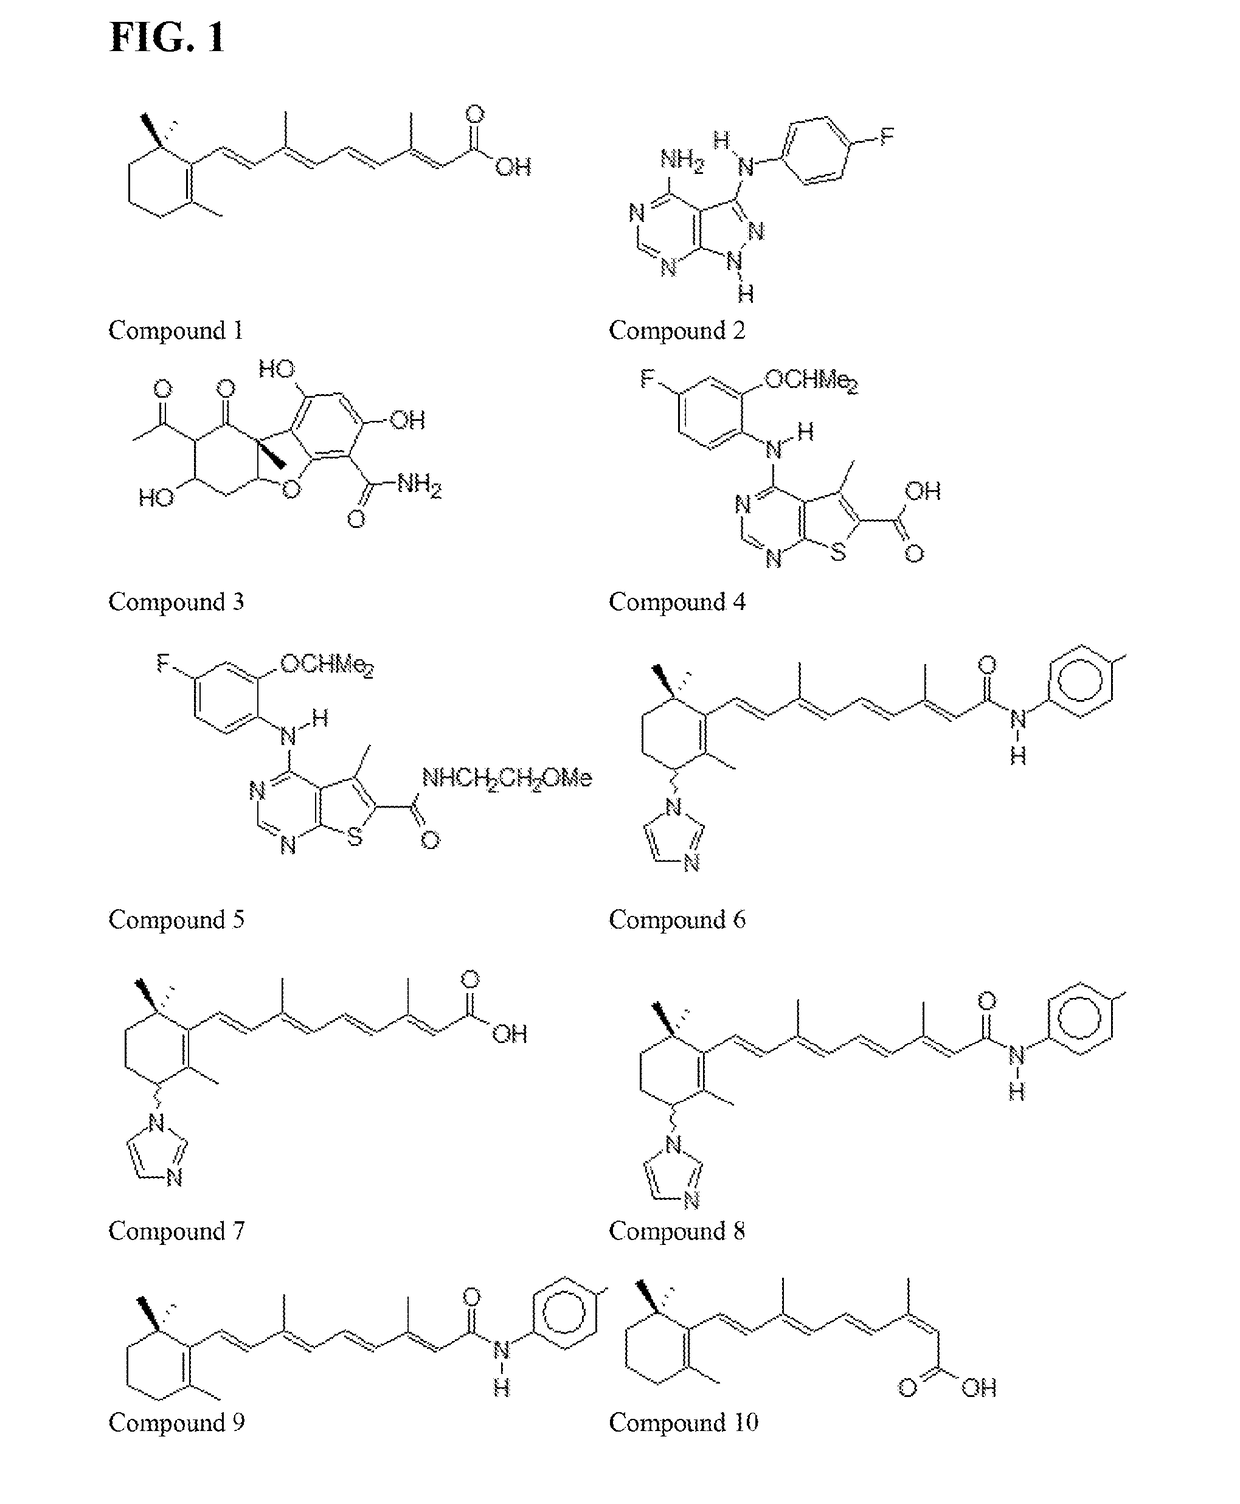 13-Cis-RAMBA RETINAMIDES THAT DEGRADE MNKs FOR TREATING CANCER